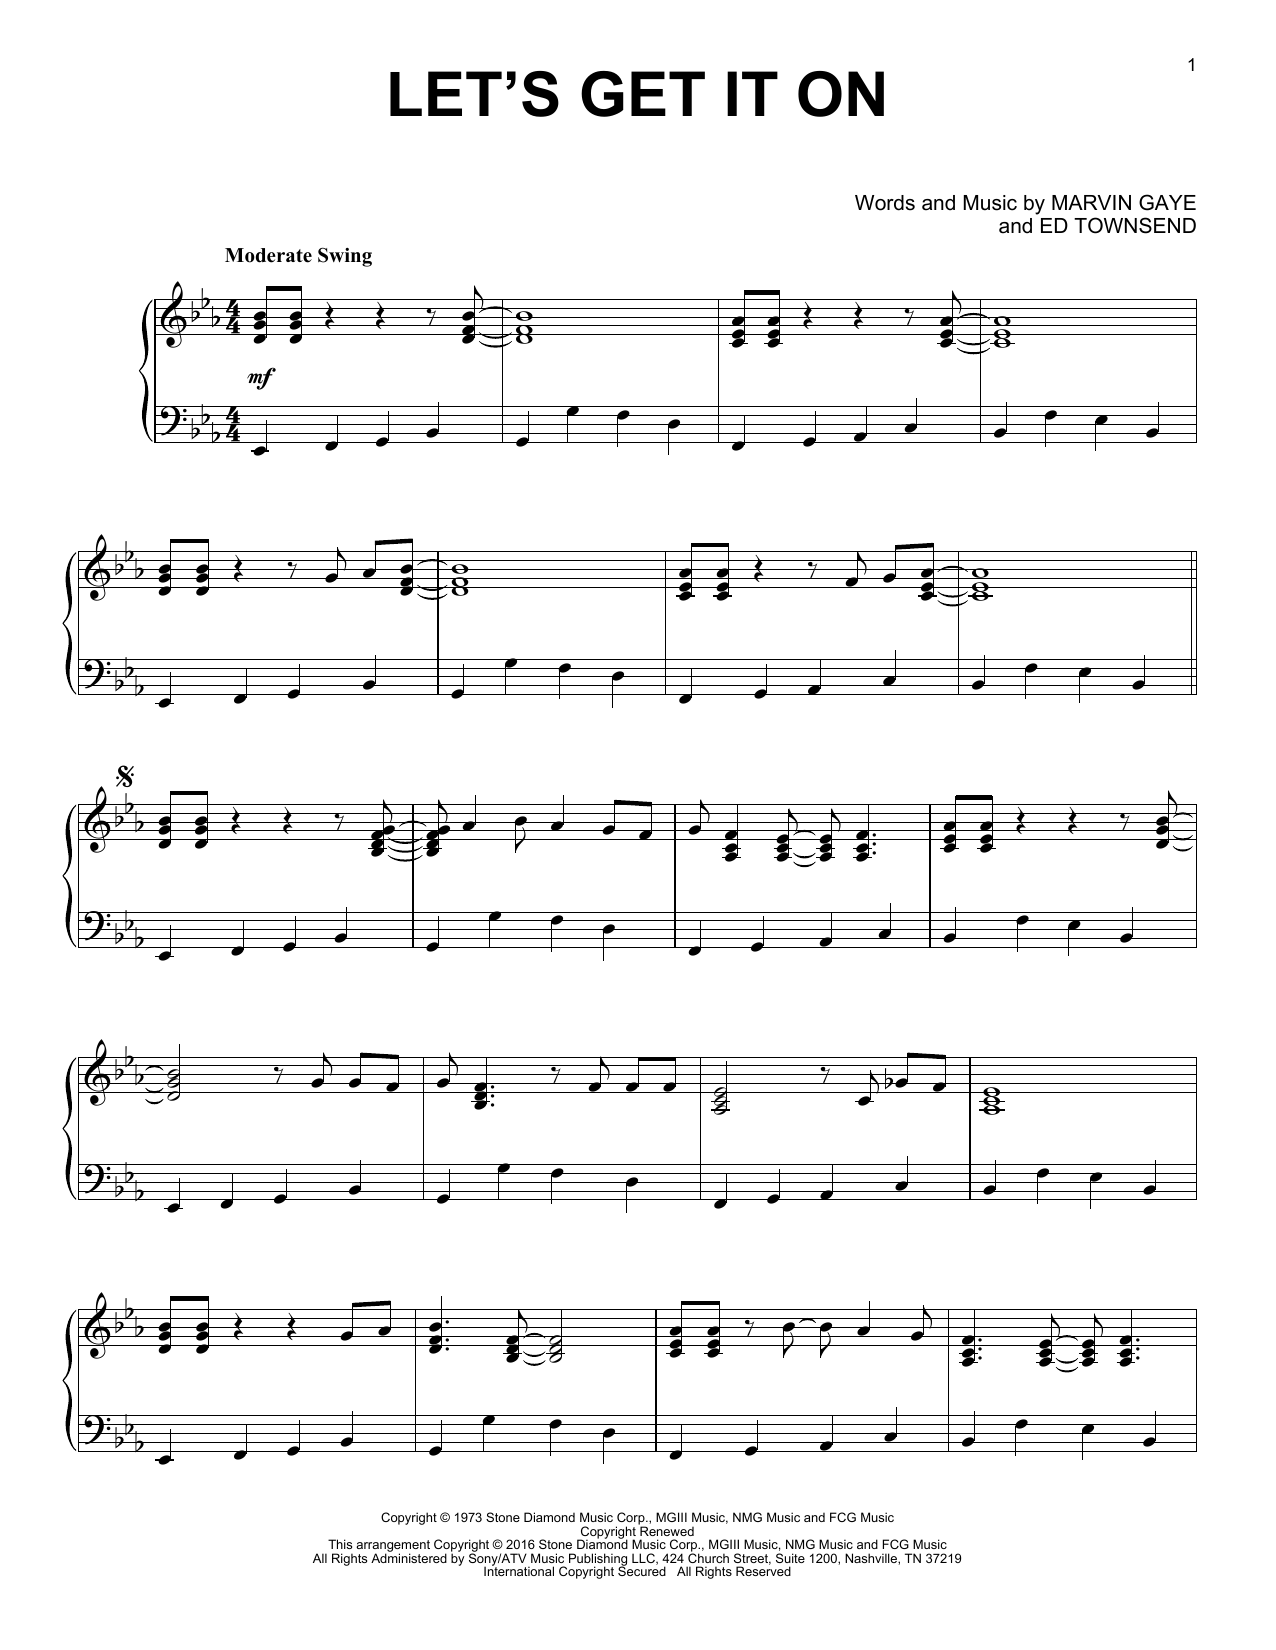 Chords Let s Get It On Marvin Gaye "Let's Get It On [Jazz version]" Sheet Music PDF Notes, Chords  | Funk Score Piano Solo Download Printable. SKU: 176655